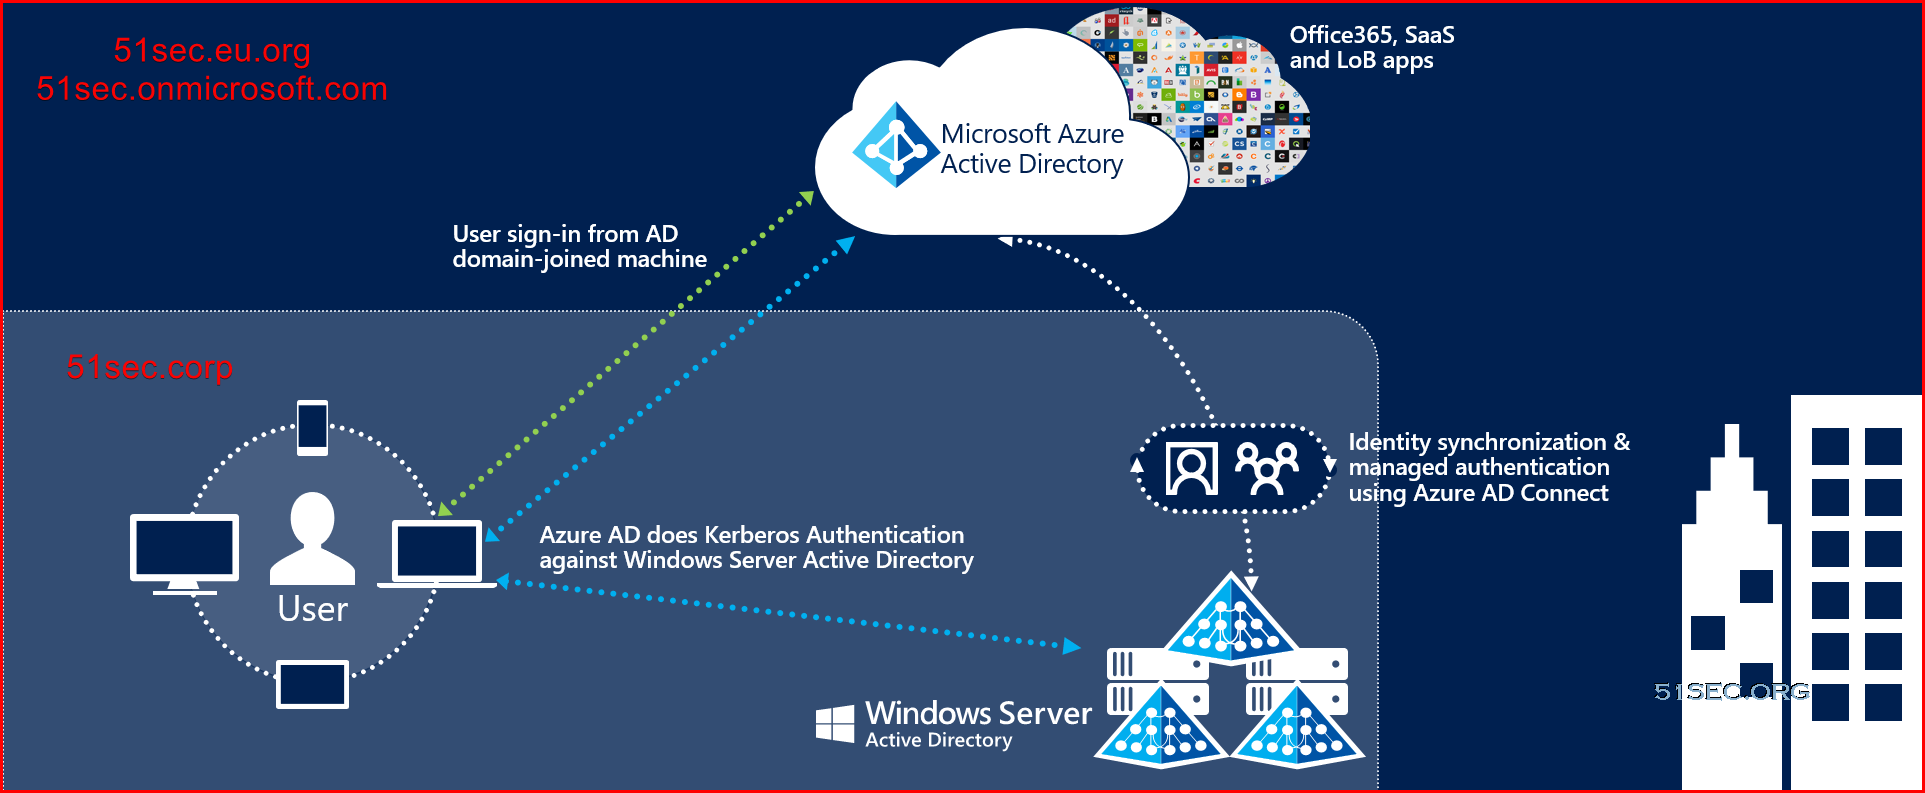 Set Up On-Prem Non-Routable Domain For Identity Synchronization With Azure AD (AAD)